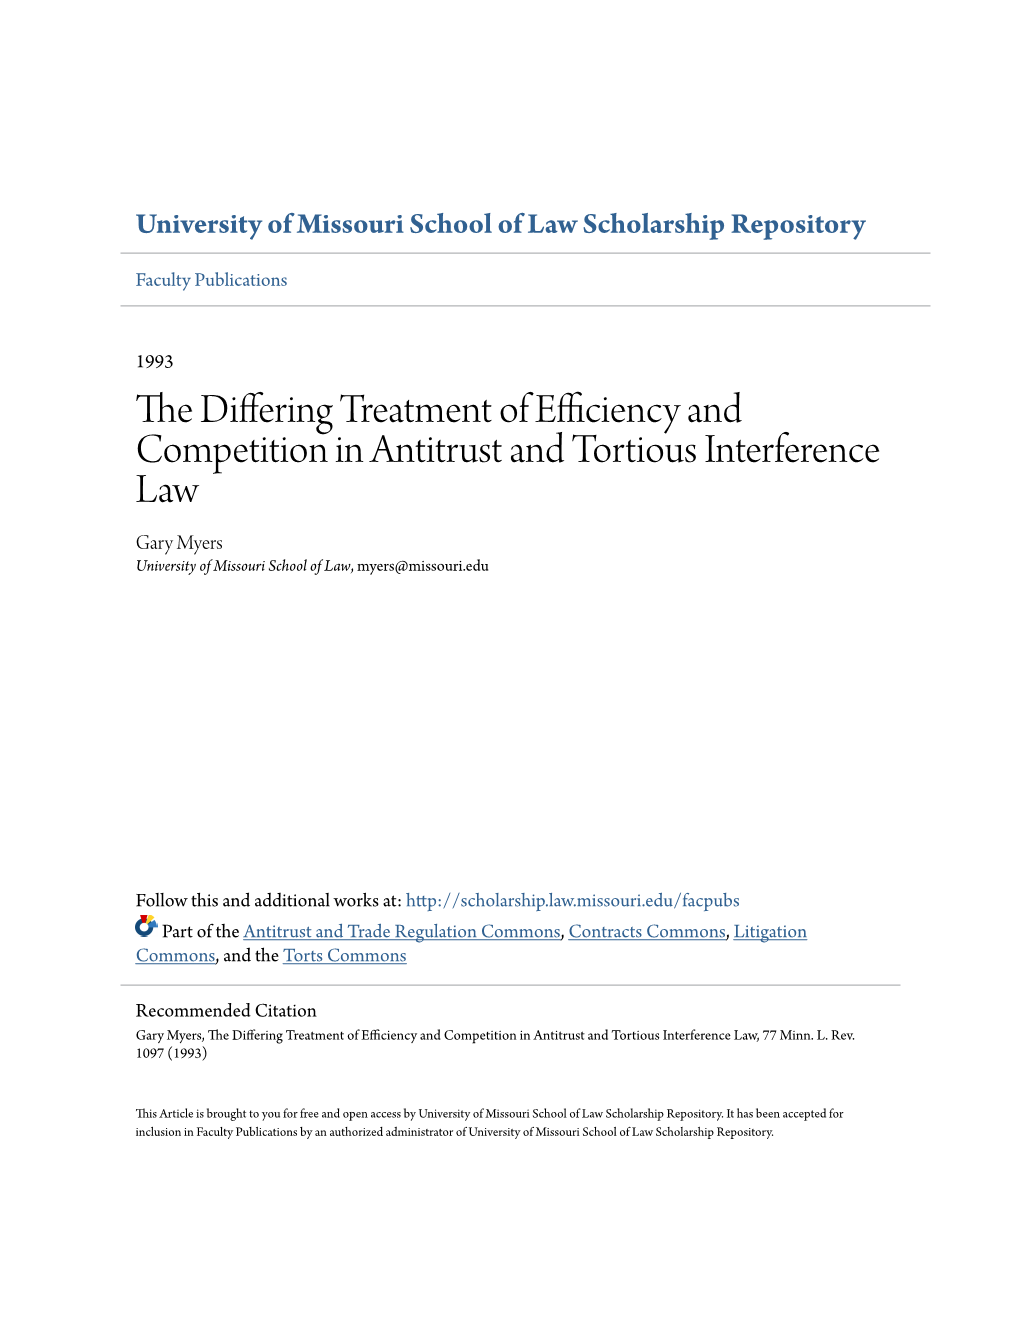 The Differing Treatment of Efficiency and Competition in Antitrust and Tortious Interference Law Gary Myers University of Missouri School of Law, Myers@Missouri.Edu